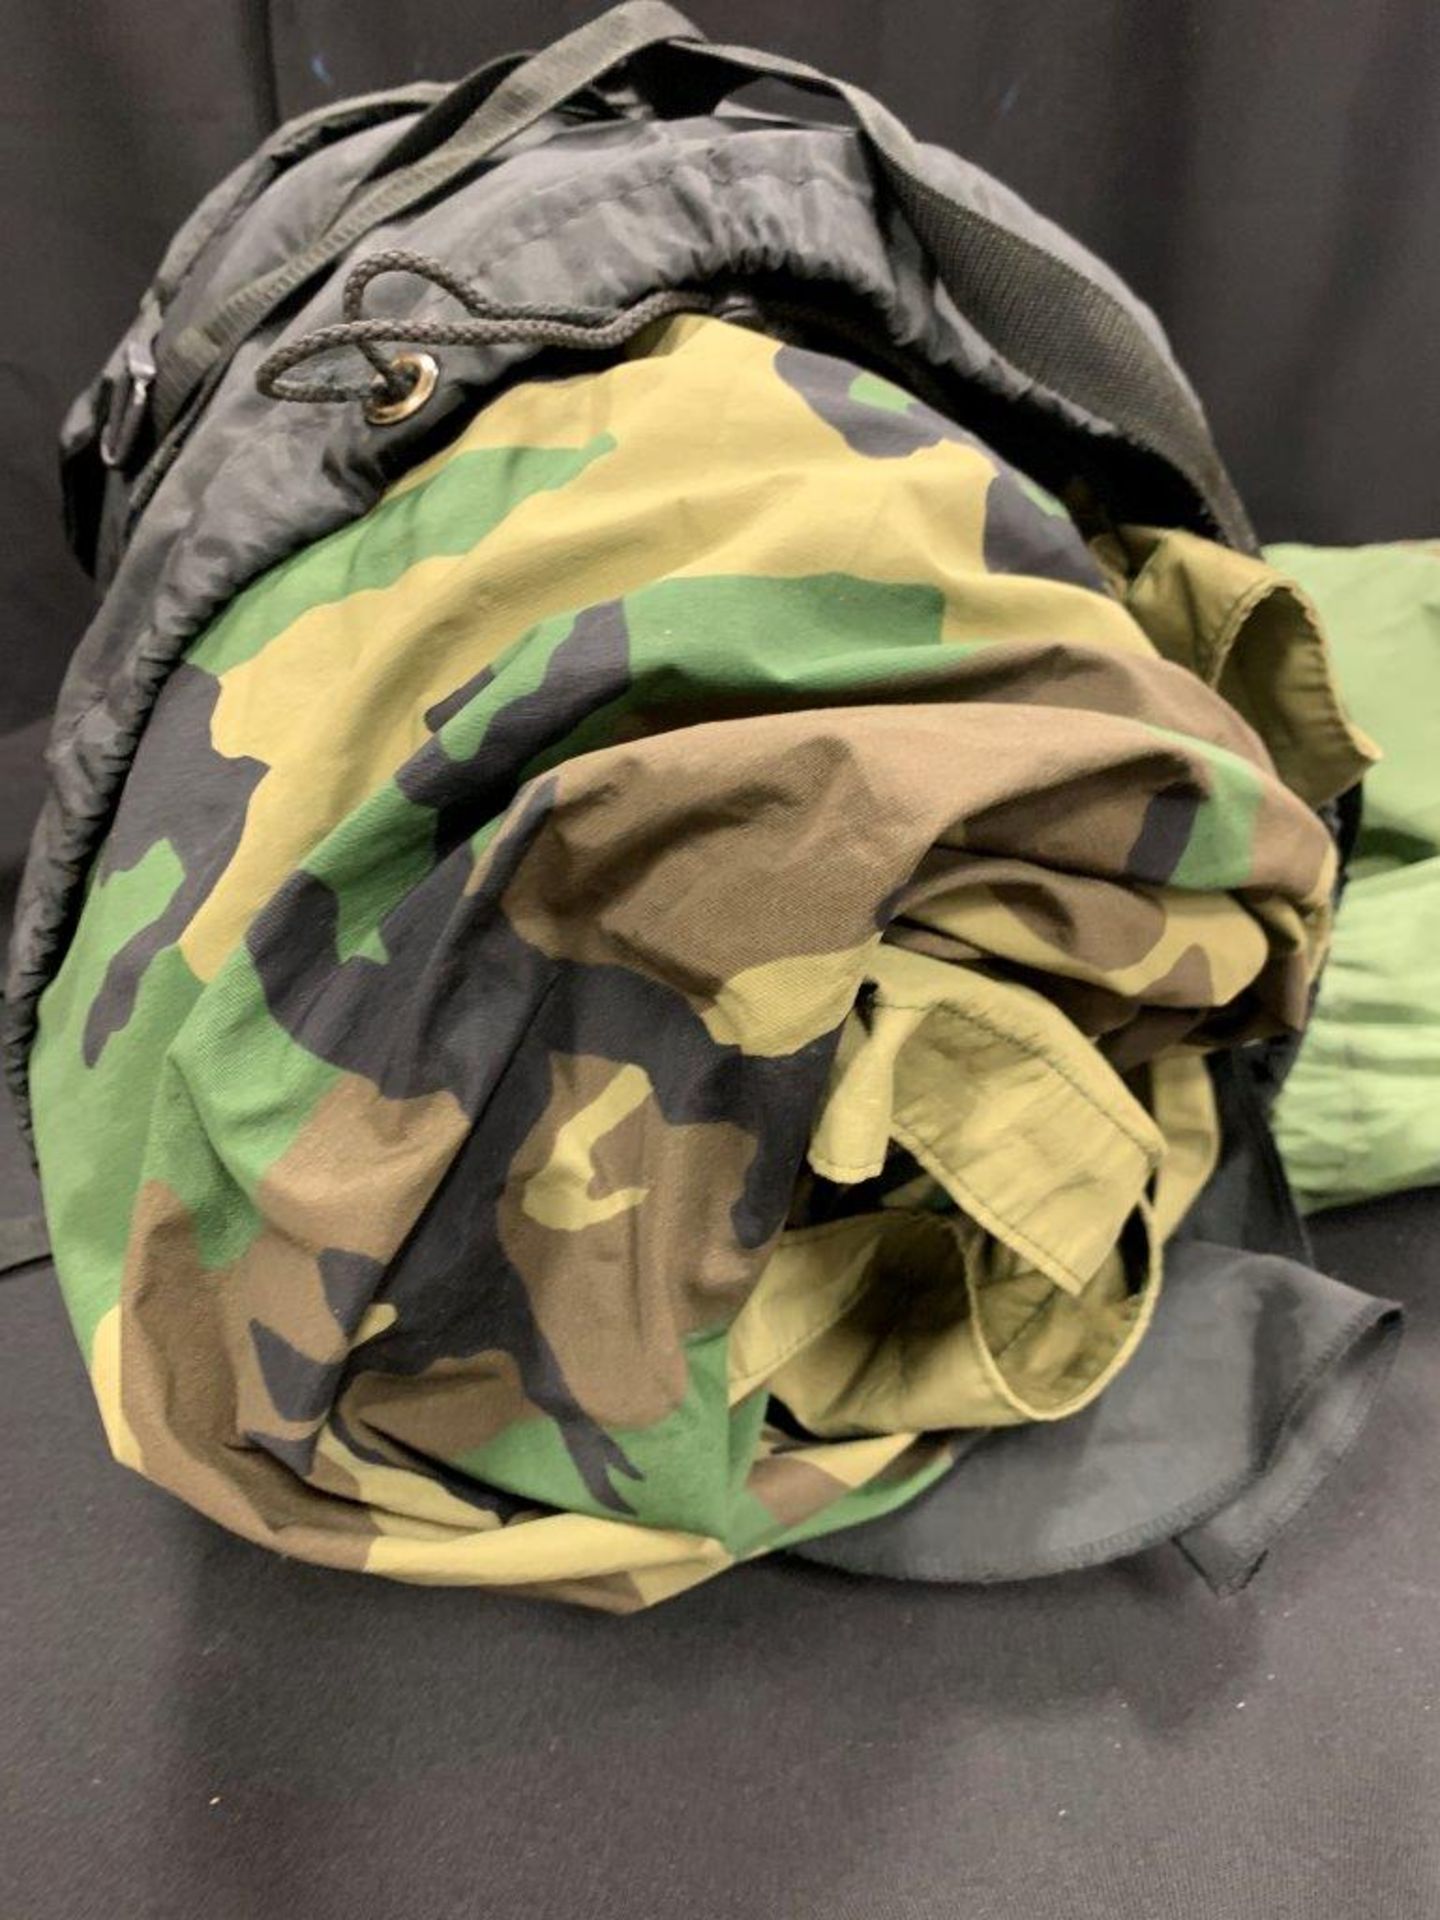 CAMMO SLEEPING BAG IN BACK PACK CASE - Image 3 of 4